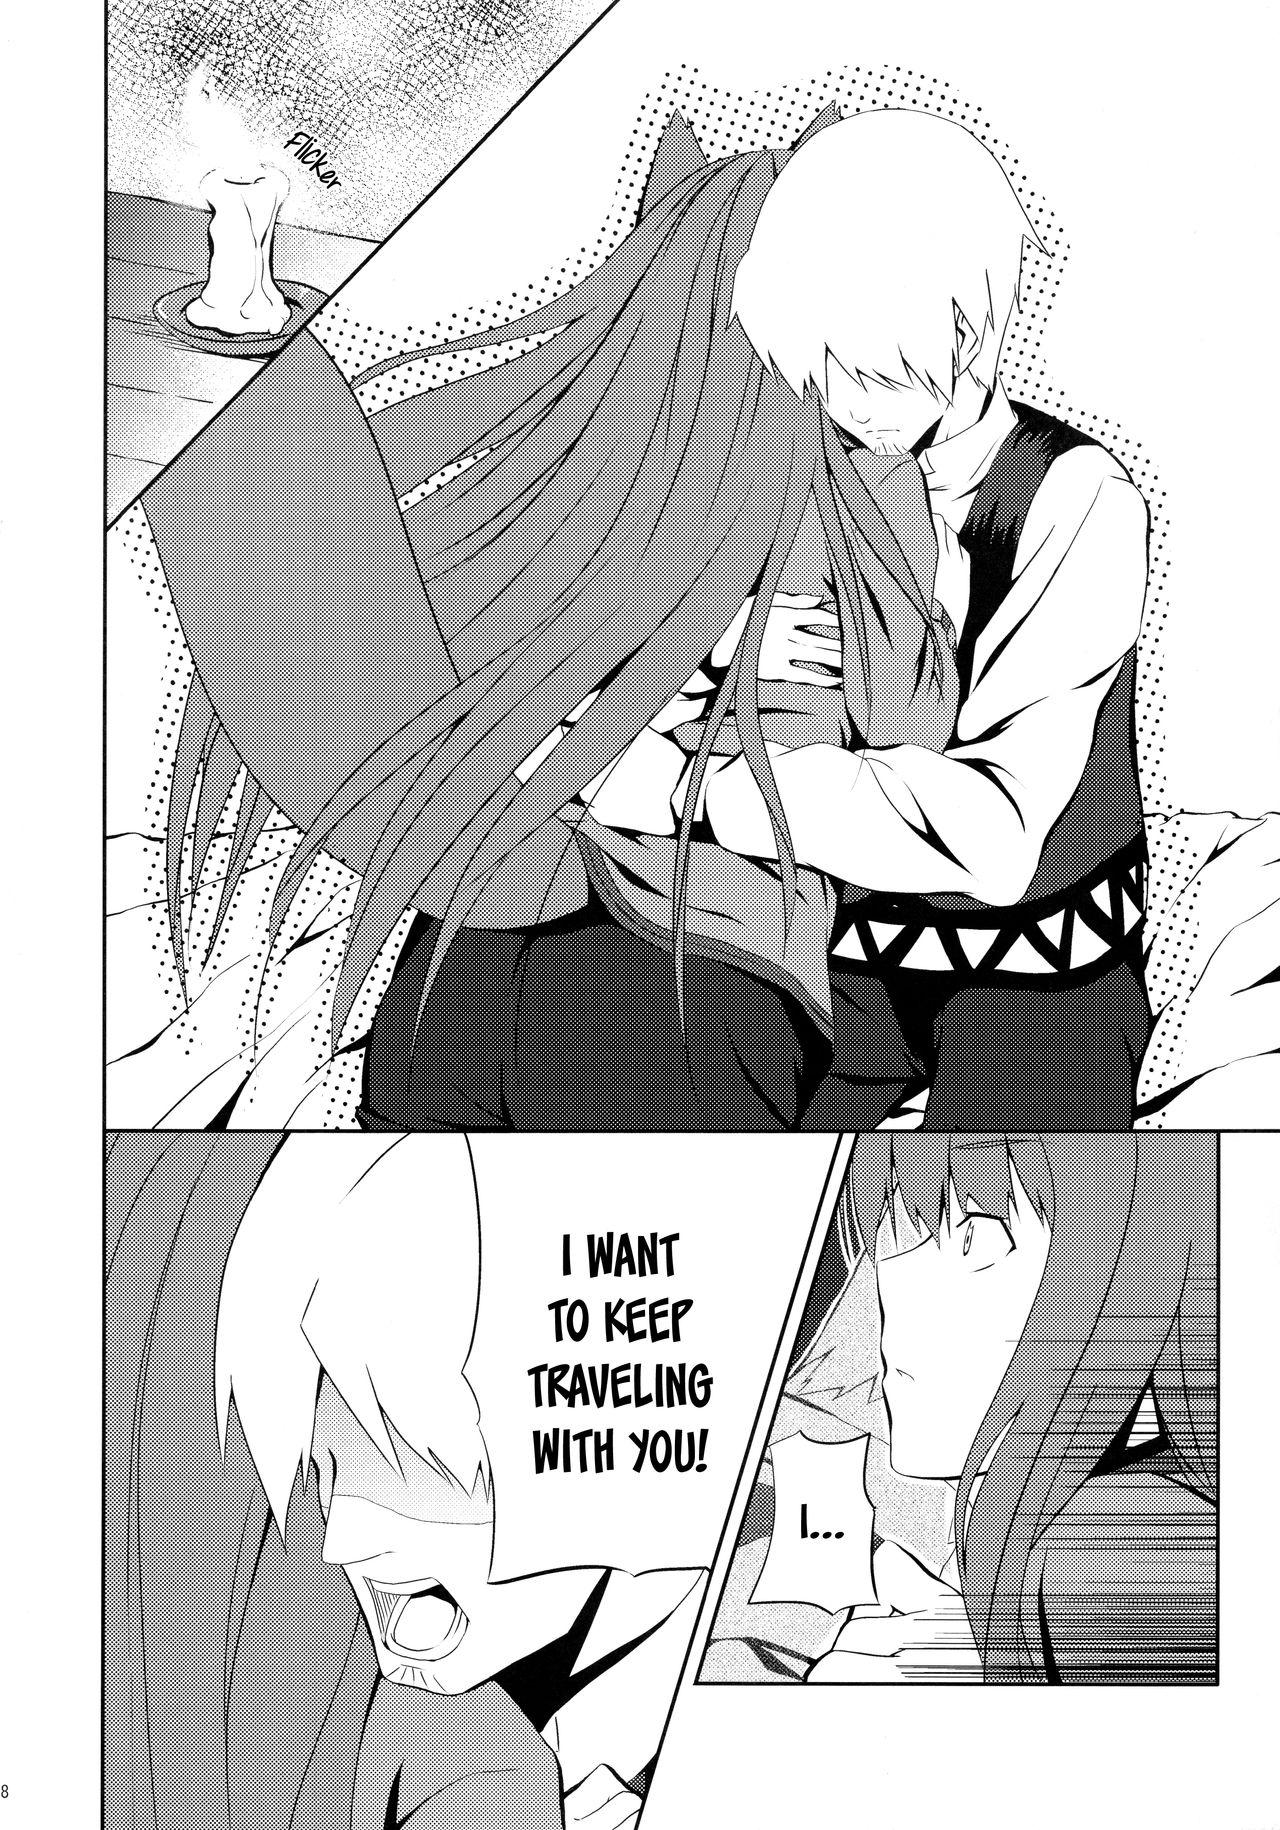 Body Massage Bitter Apple - Spice and wolf Linda - Page 8